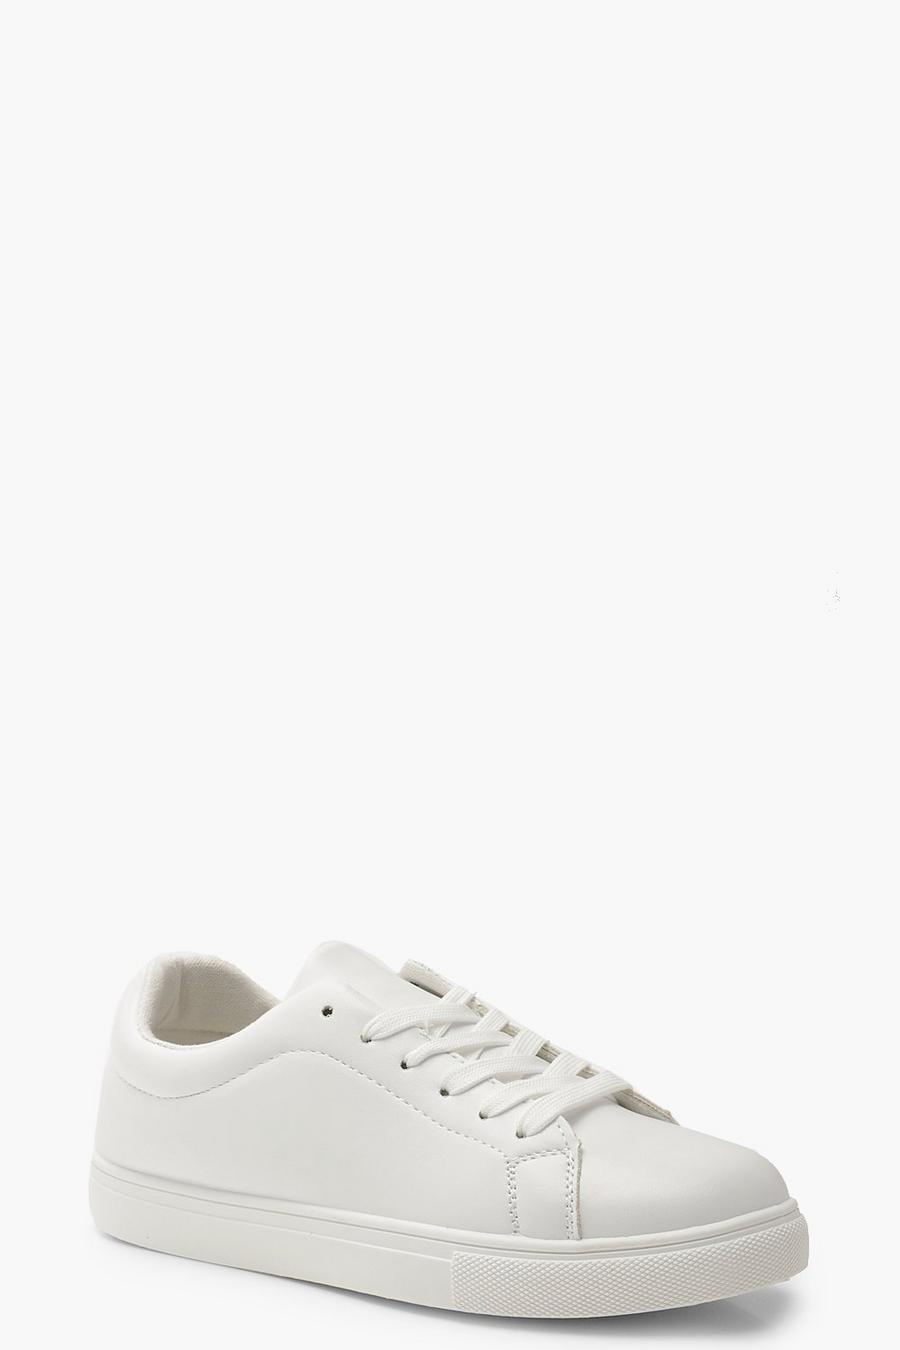 White Lace Up Flat Sneakers image number 1